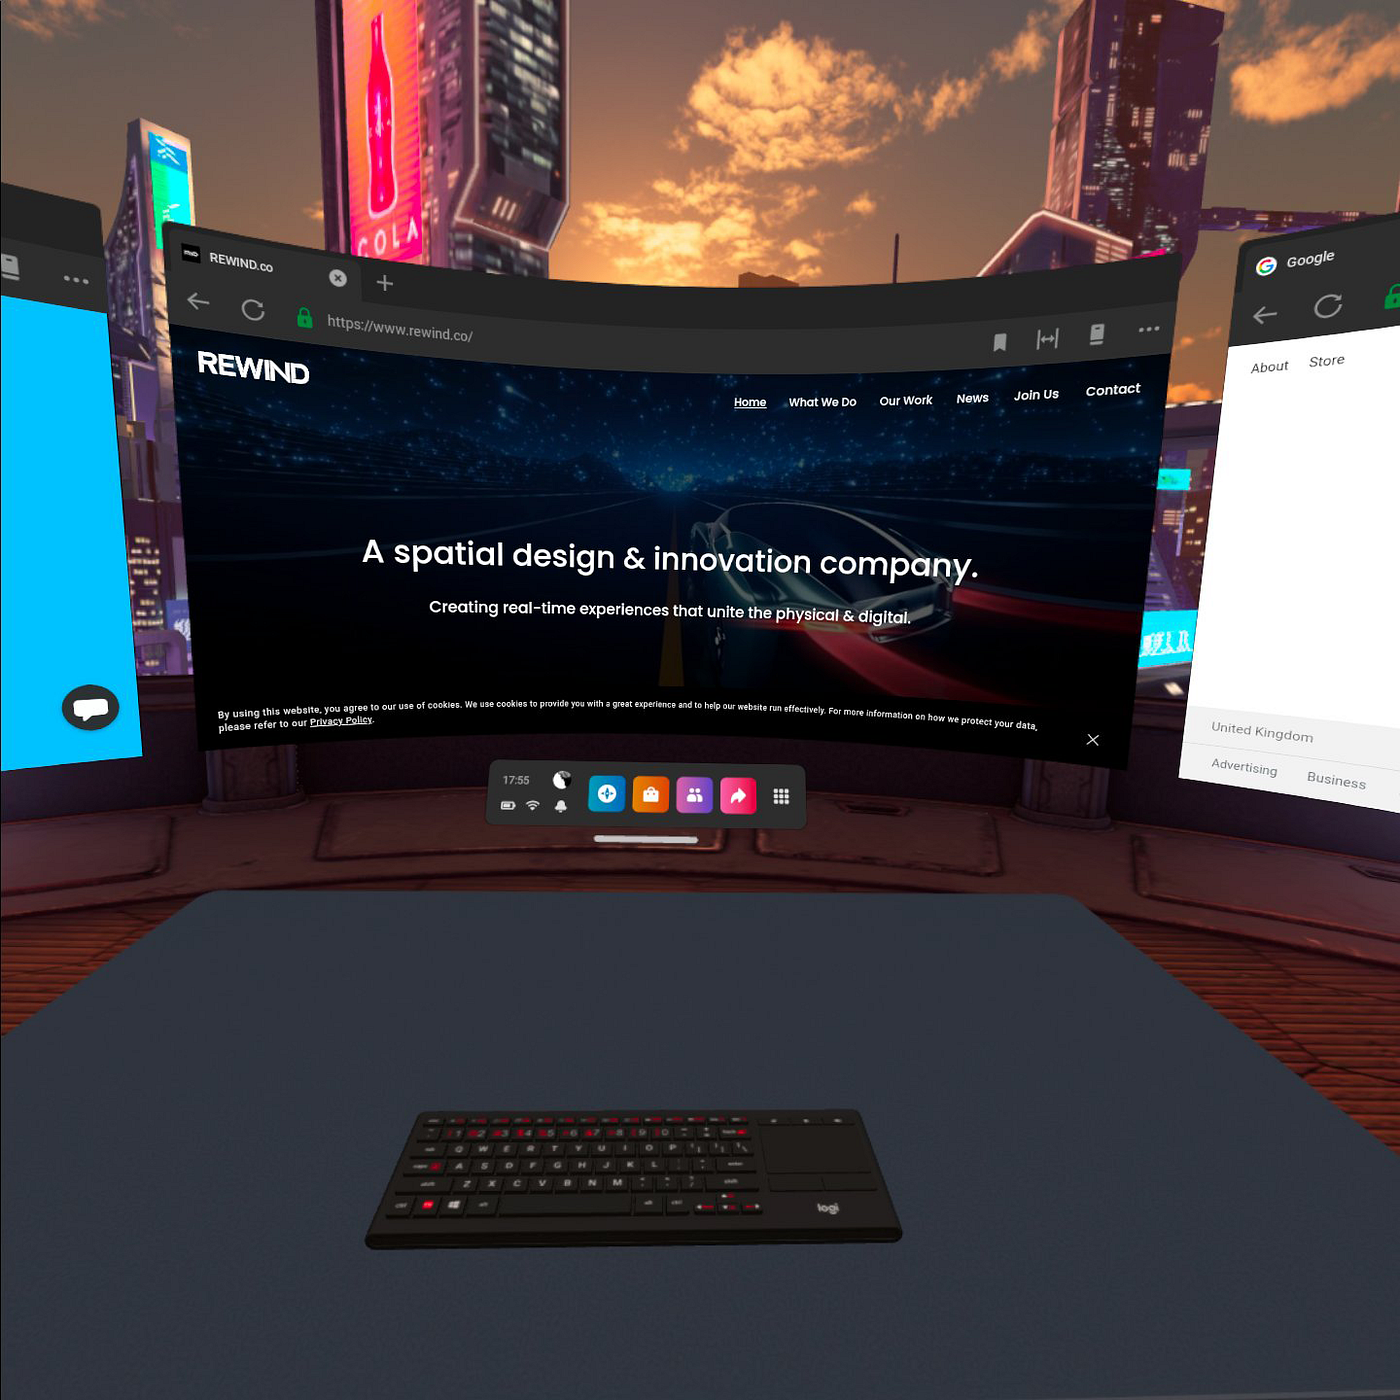 The Logitech K830 Keyboard And Typing In VR | by Magnopus | XRLO — eXtended  Reality Lowdown | Medium